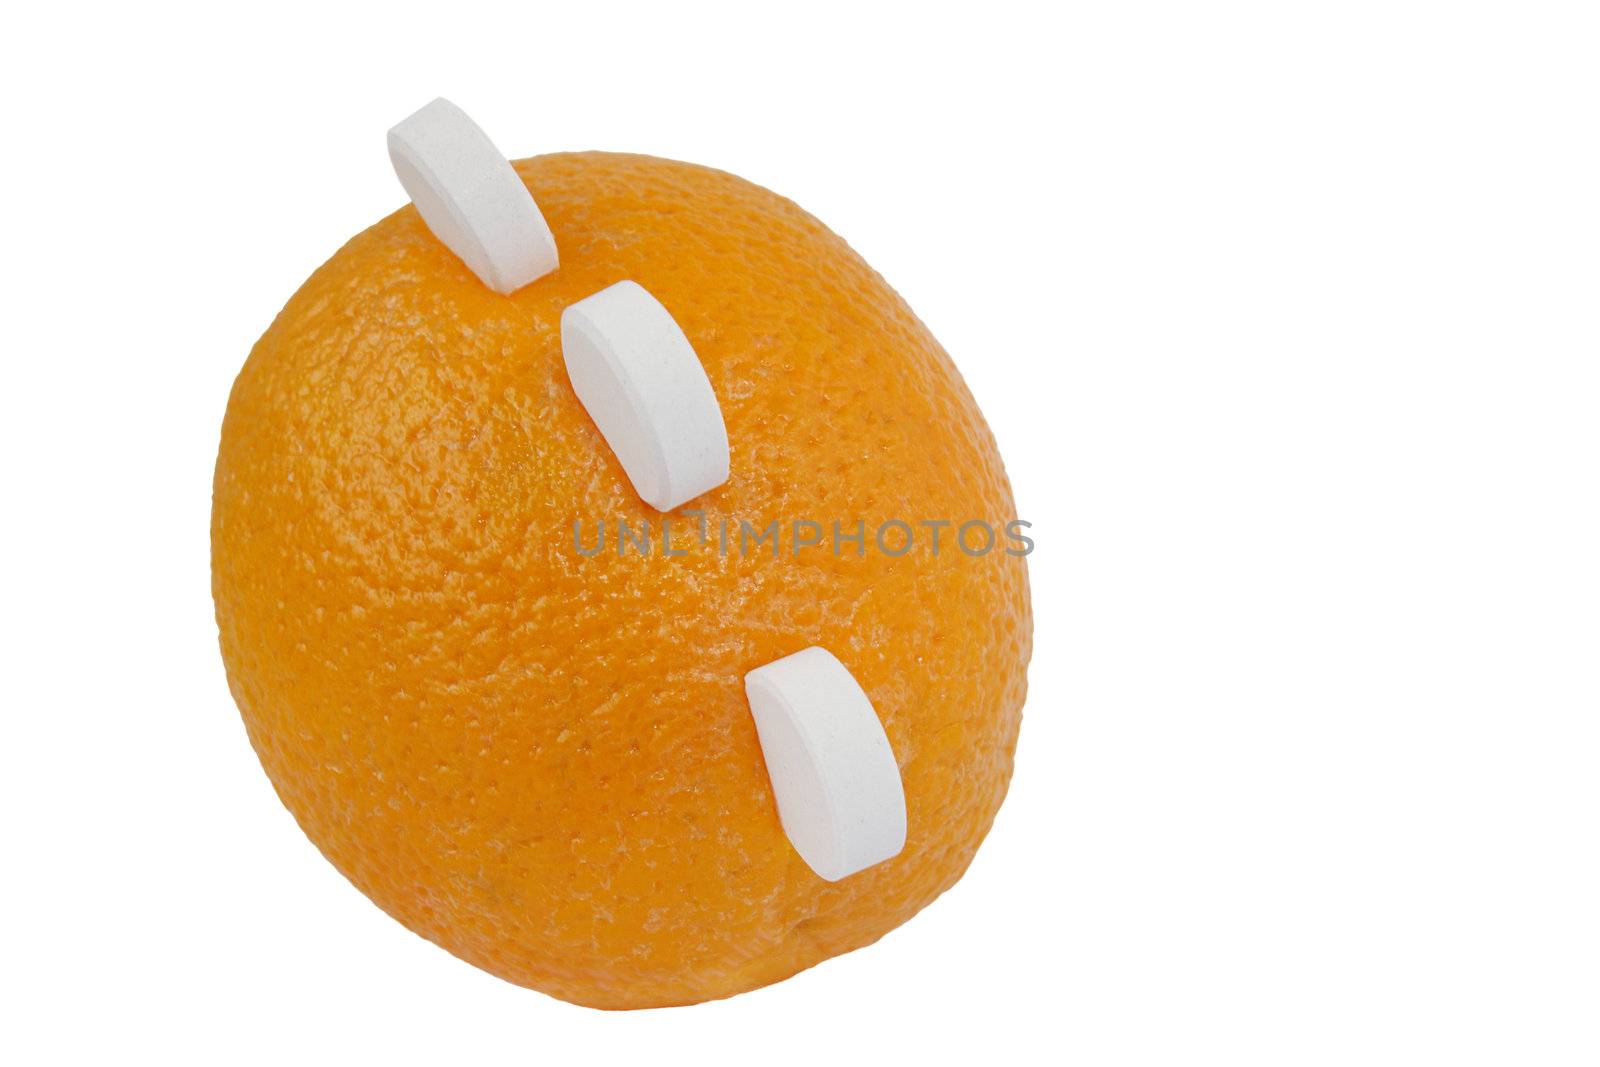 Ripe orange with three white round tablets of vitamin c isolated on white background